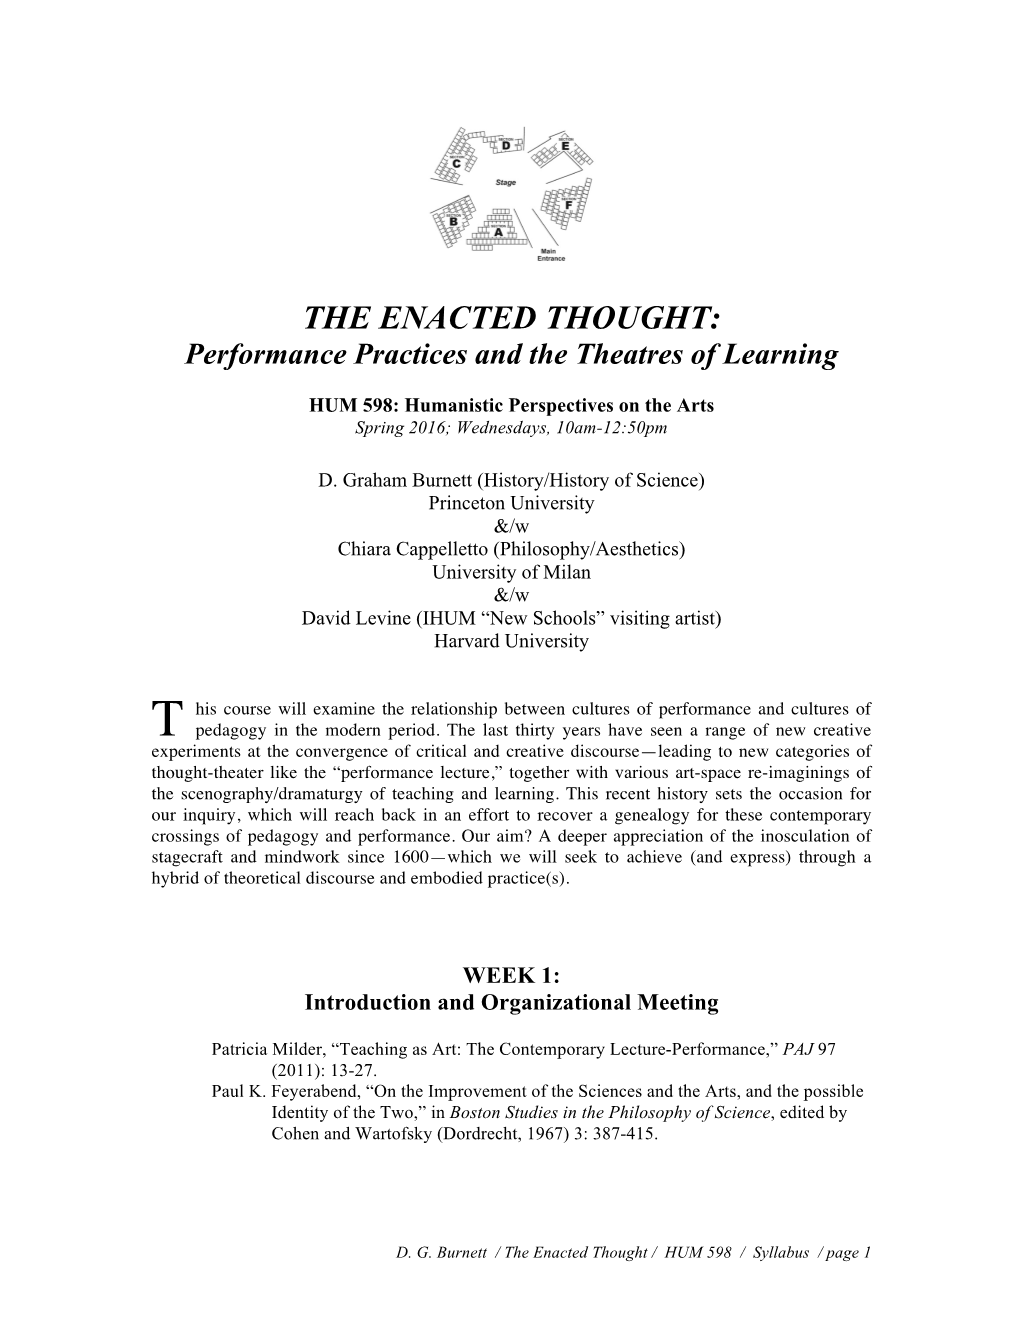 THE ENACTED THOUGHT: Performance Practices and the Theatres of Learning